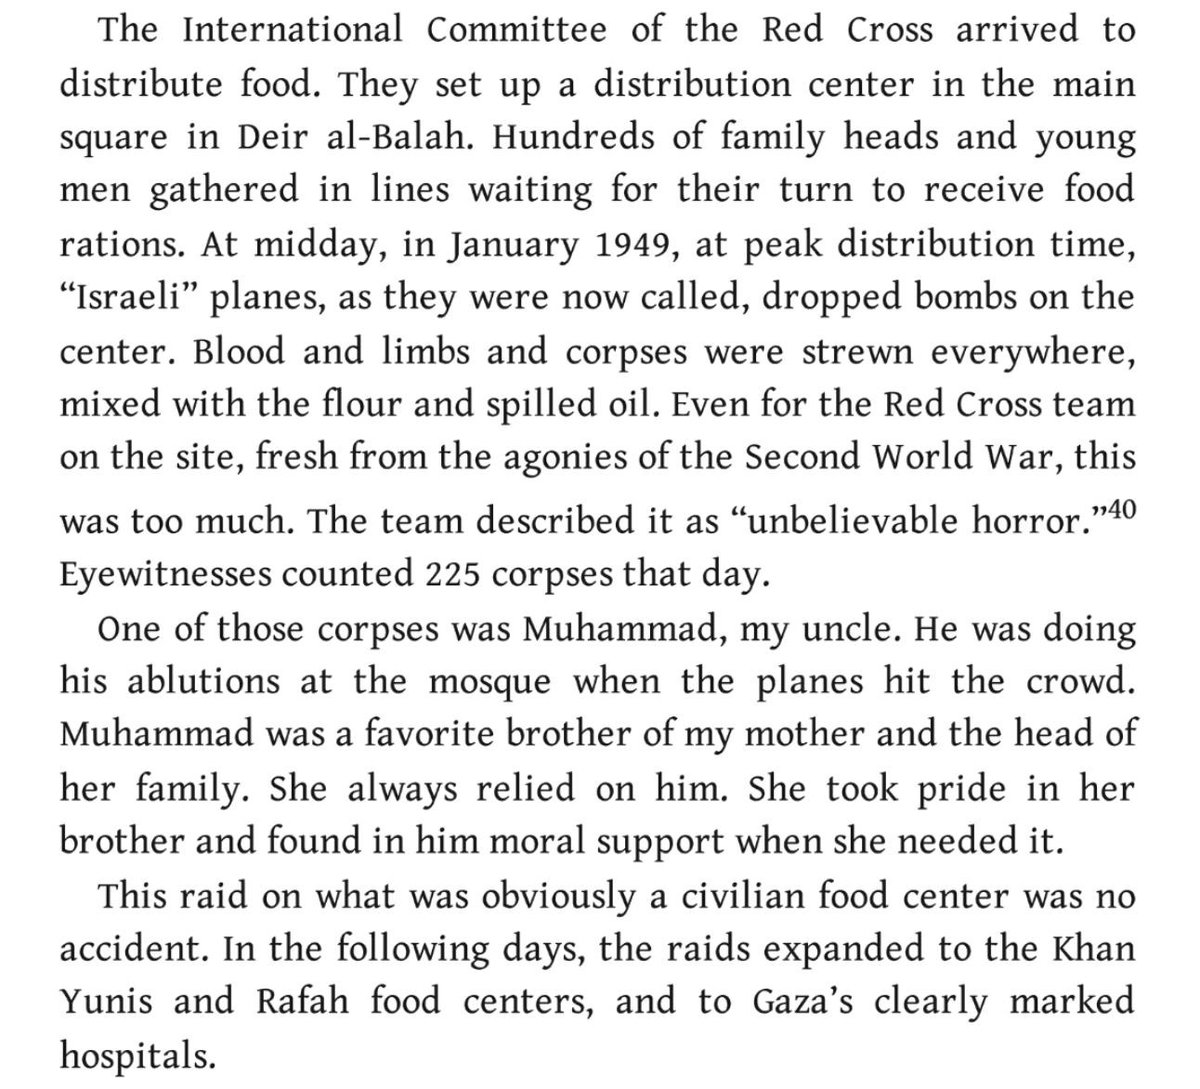 'Blood and limbs and corpses were strewn everywhere, mixed with the flour and spilled oil. Even for the Red Cross team on the site, fresh from the agonies of the Second World War, this was too much. The team described it as 'unbelievable horror.'' No, this is not a description…